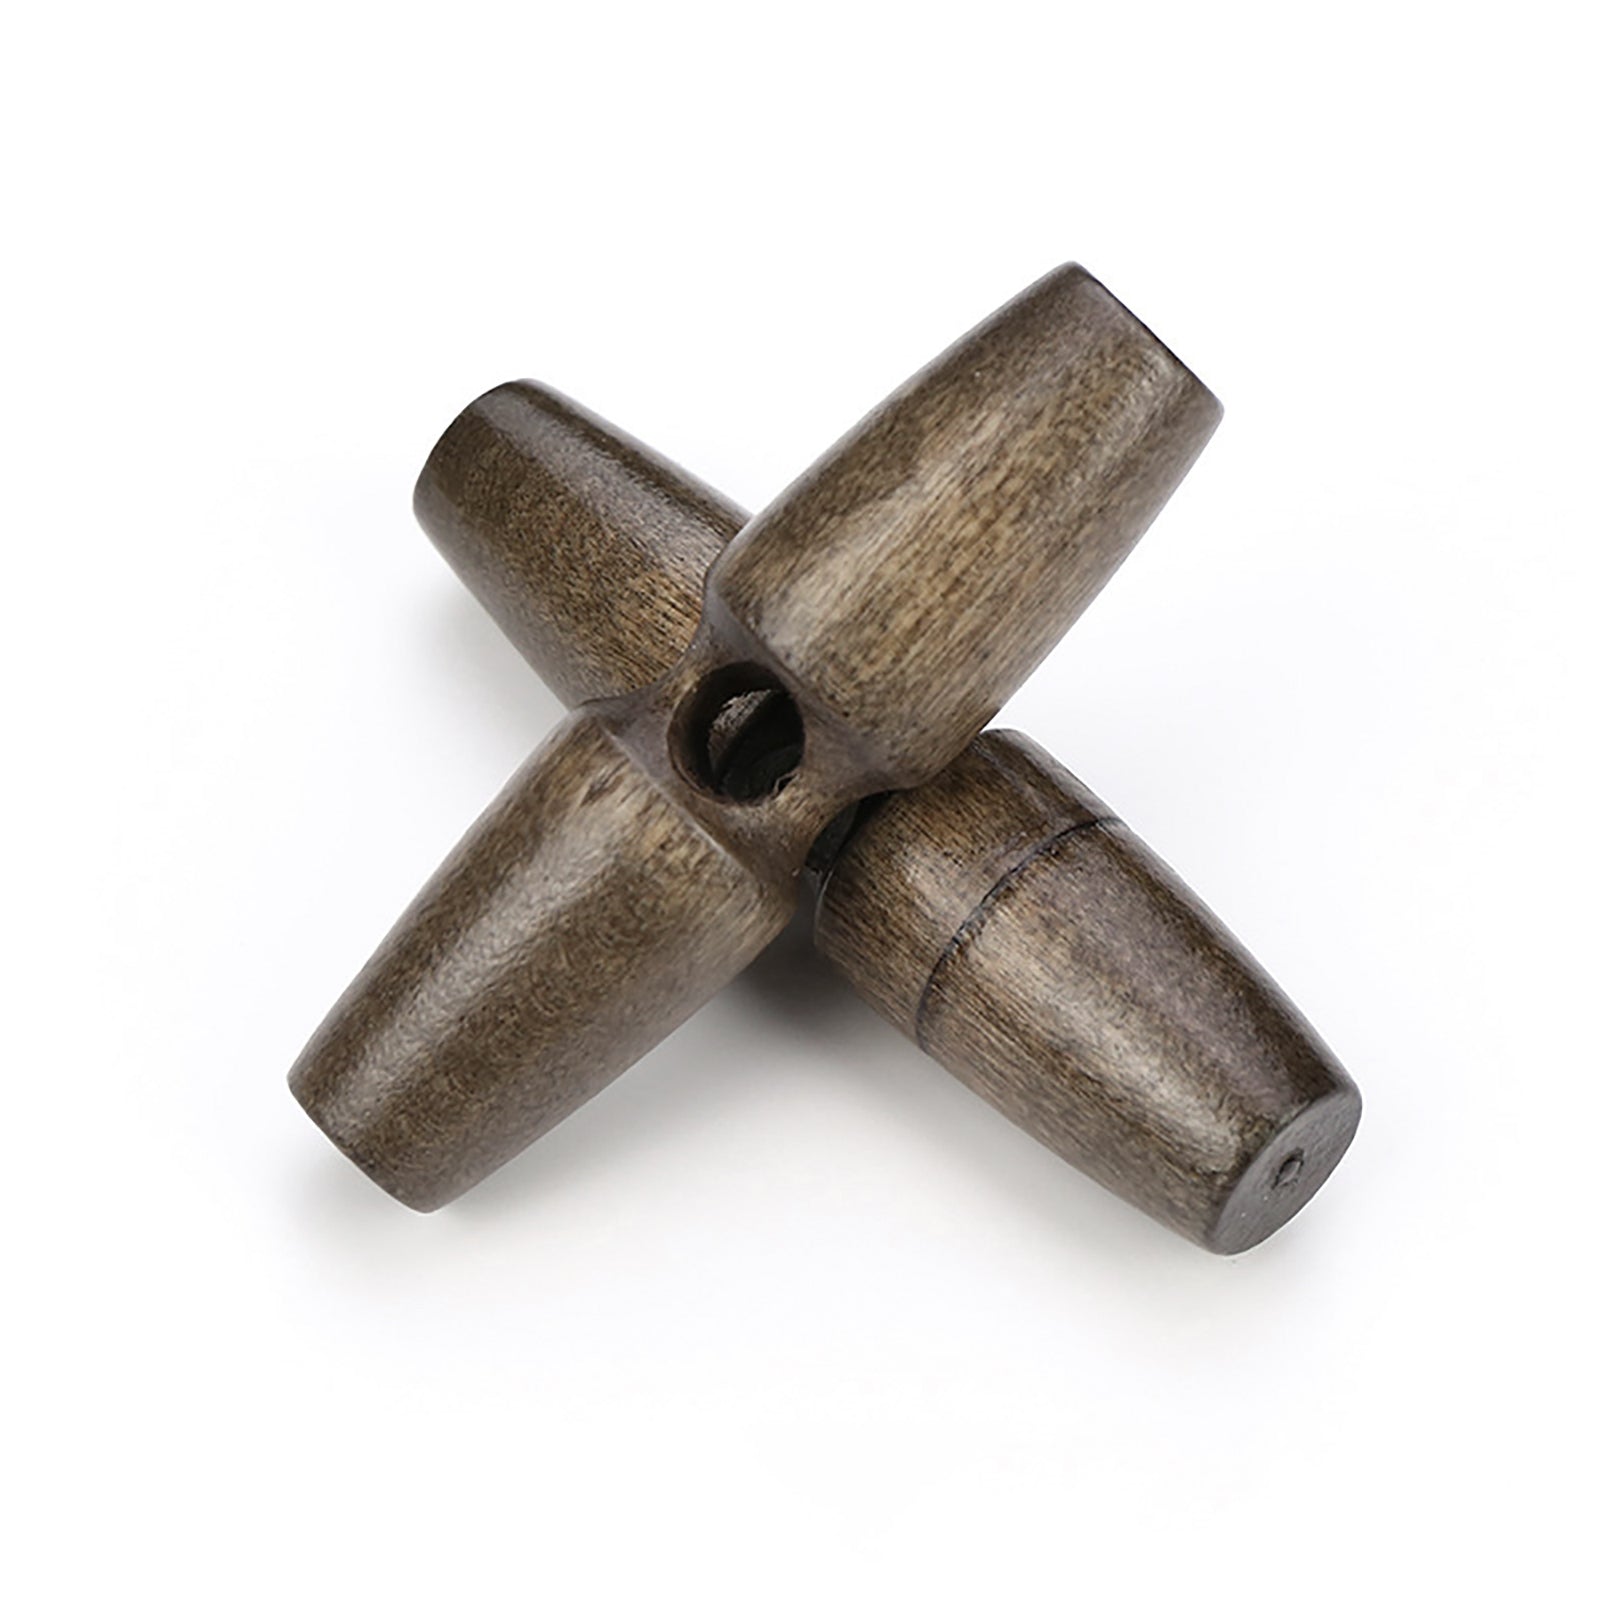 3 wooden brown toggle buttons - 30, 40 or 50mm